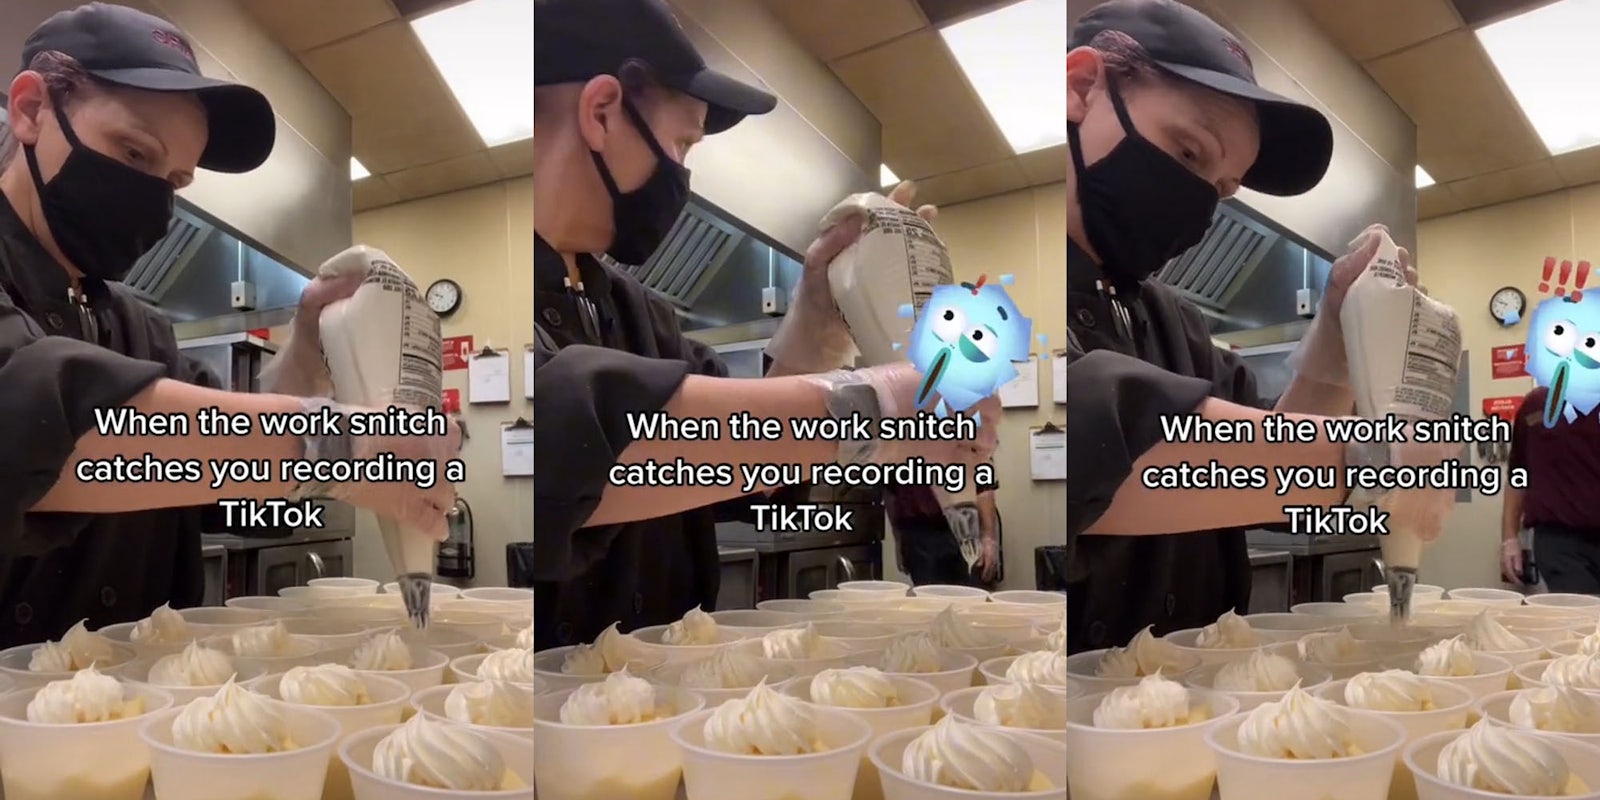 food service employee making desserts caption ' When the work snitch catches you recording a TikTok'(l)food service employee making desserts looking to her side caption ' When the work snitch catches you recording a TikTok'(c)food service employee making desserts other worker to her side caption ' When the work snitch catches you recording a TikTok'